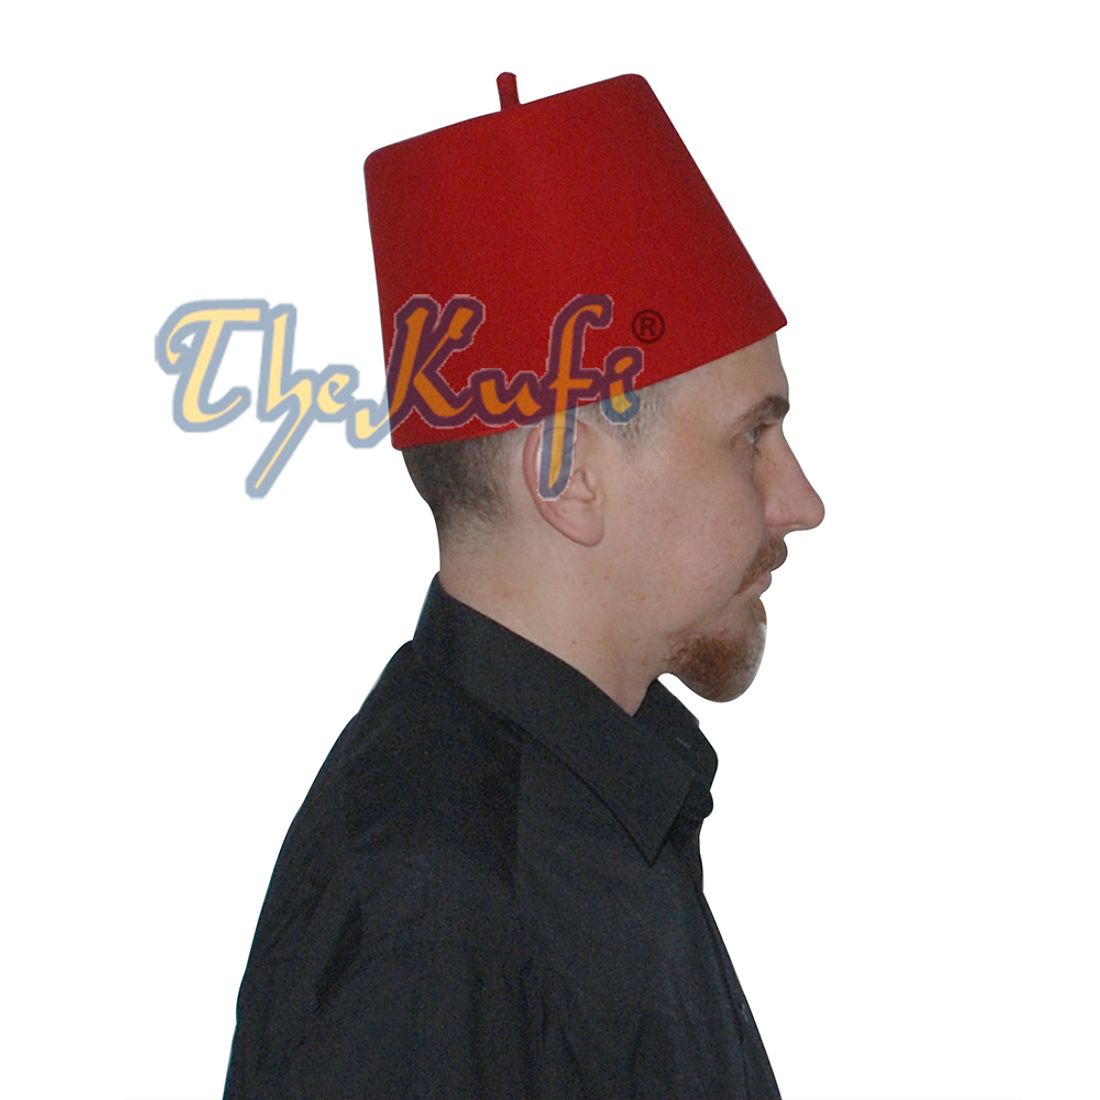 Tall Red Fez Tradition Felt Perforated Tarboosh with Stem